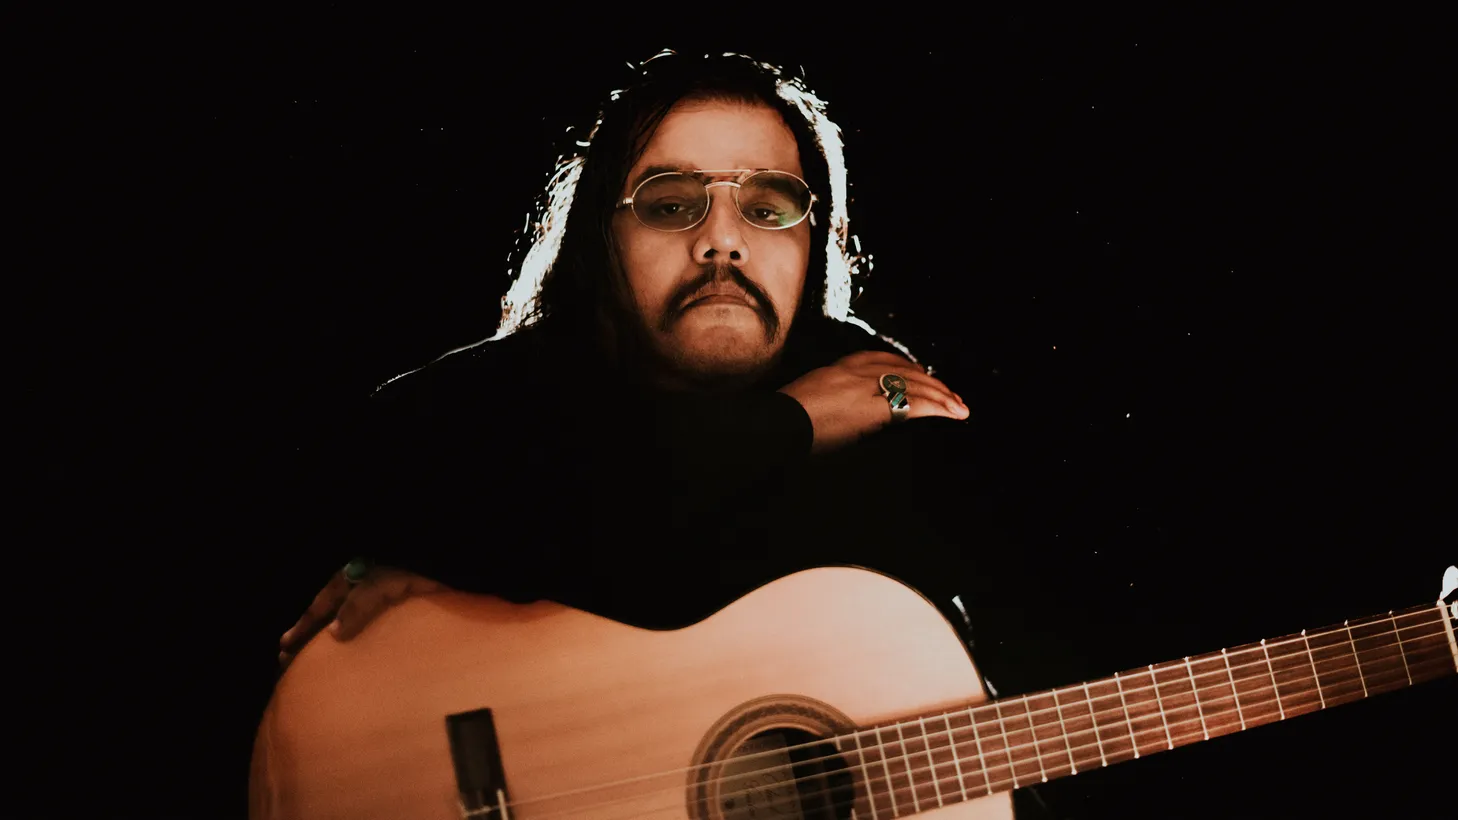 Mexican-American musician and songwriter Joel Jerome is based in Los Angeles and lends his talent to hometown artists like Cherry Glazerr and La Sera, but his own work is inspired by the likes of the Beach Boys, Fleet Foxes, and the music his…